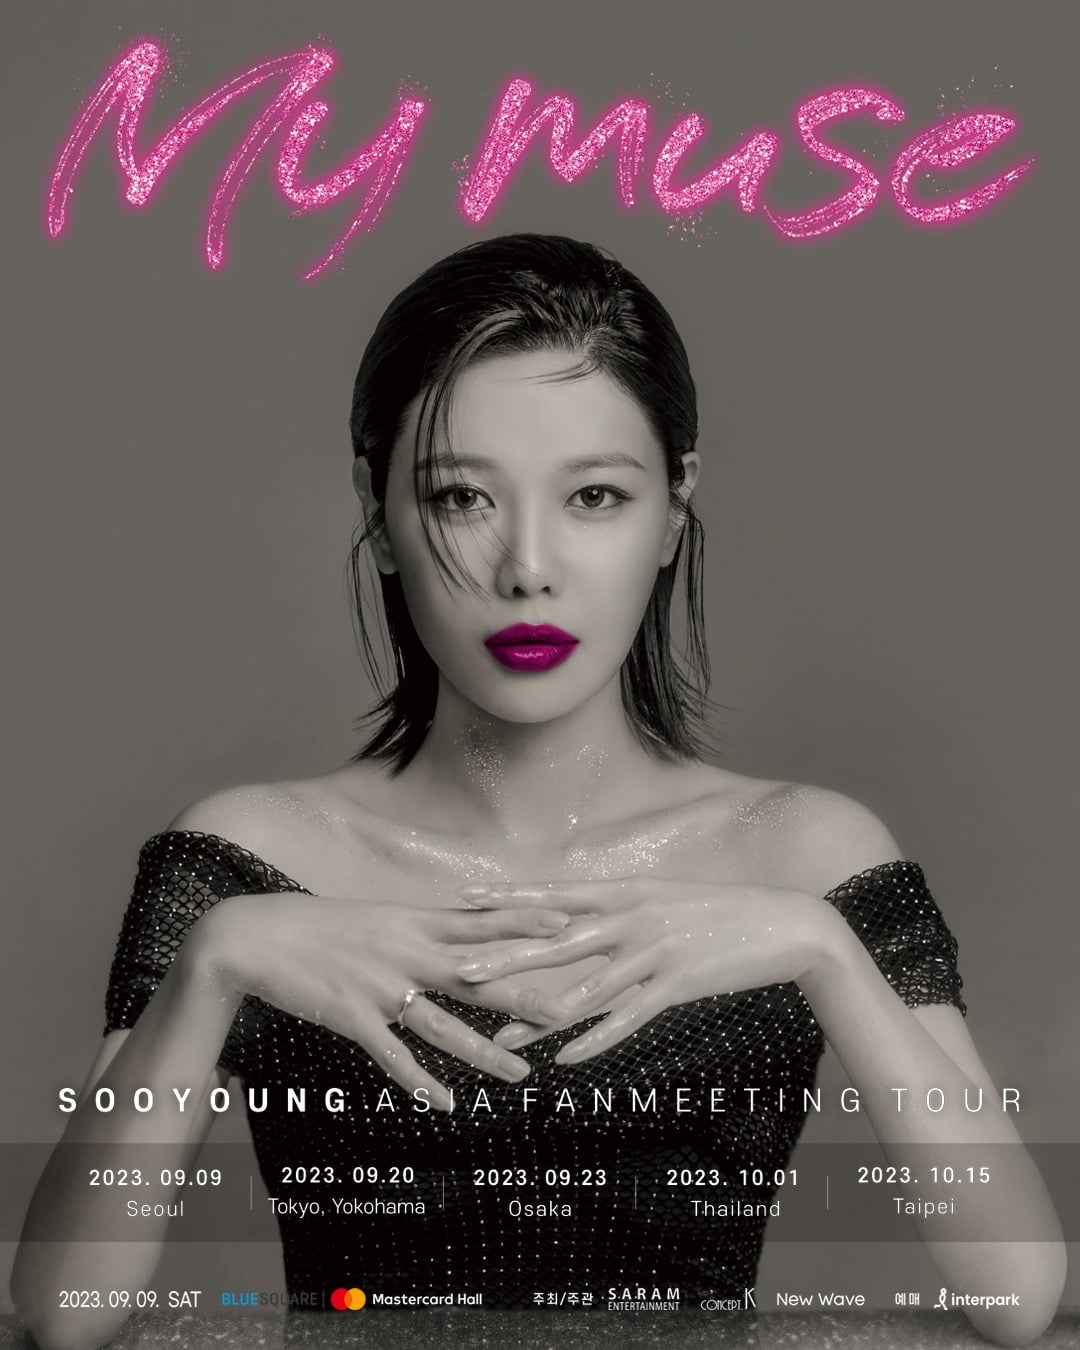 Actress Choi Soo-young holds her first Asian fan meeting tour